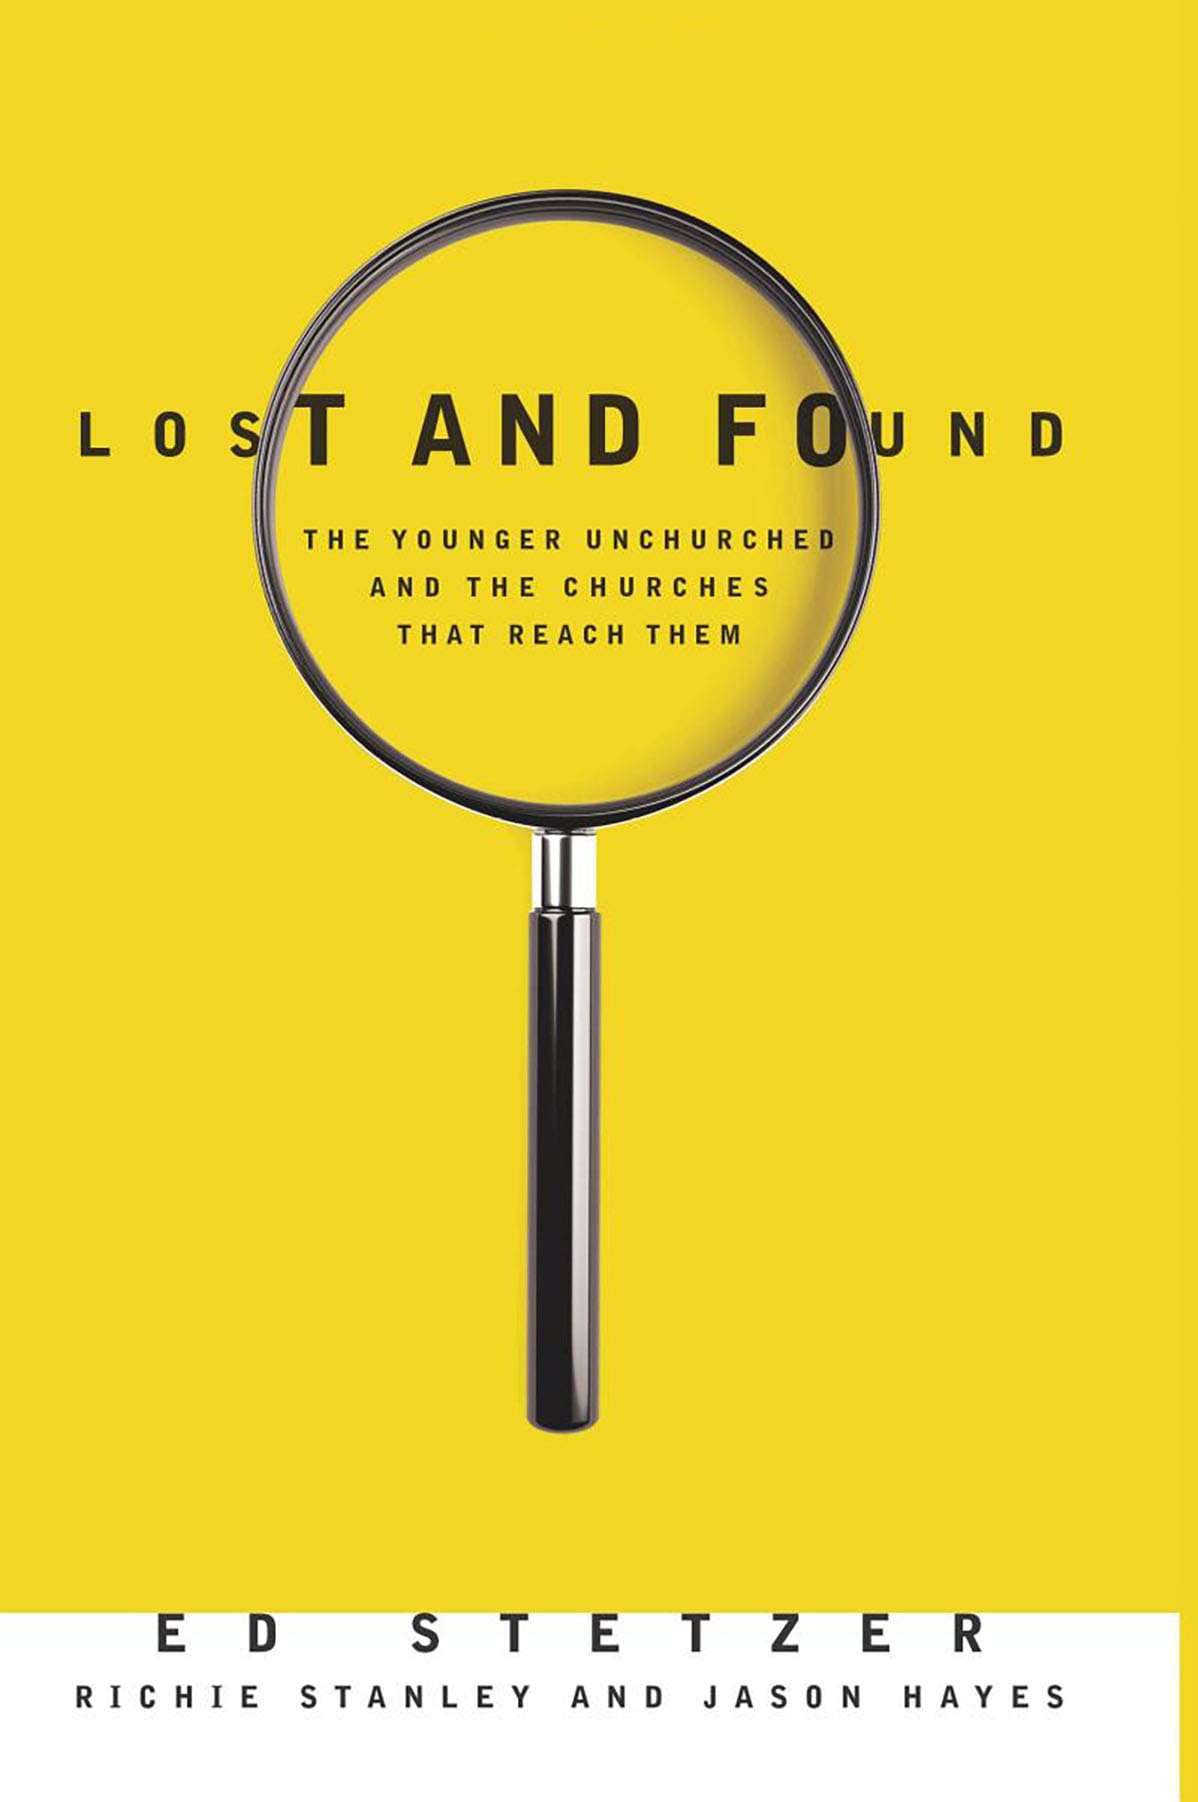 lost-and-found